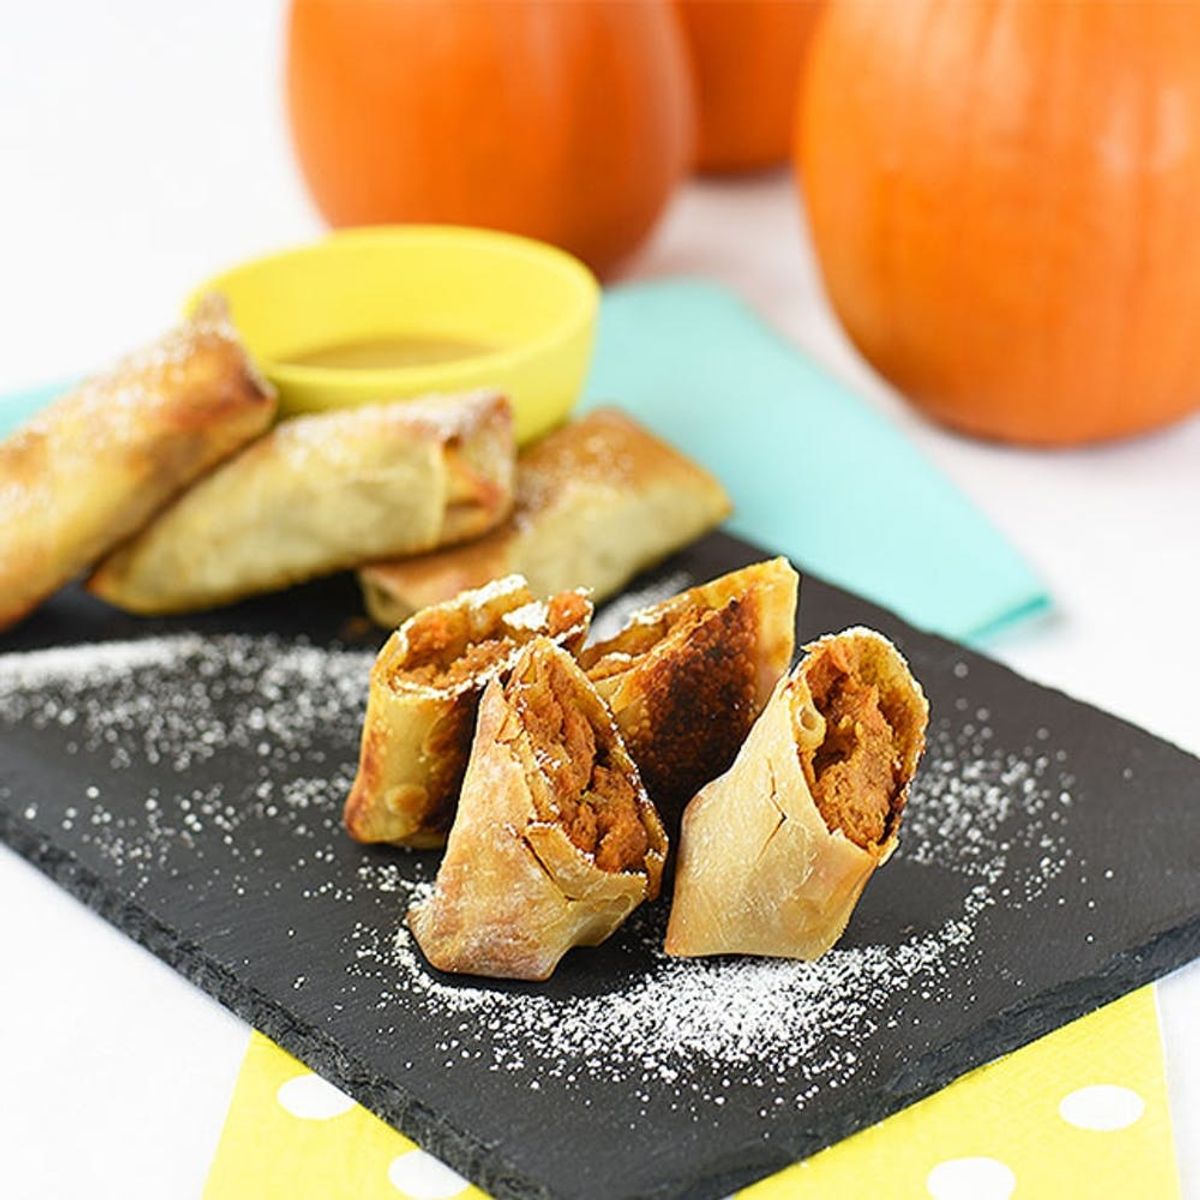 Ditch Your Pie Pan and Make These Sweet Potato Pie Egg Rolls